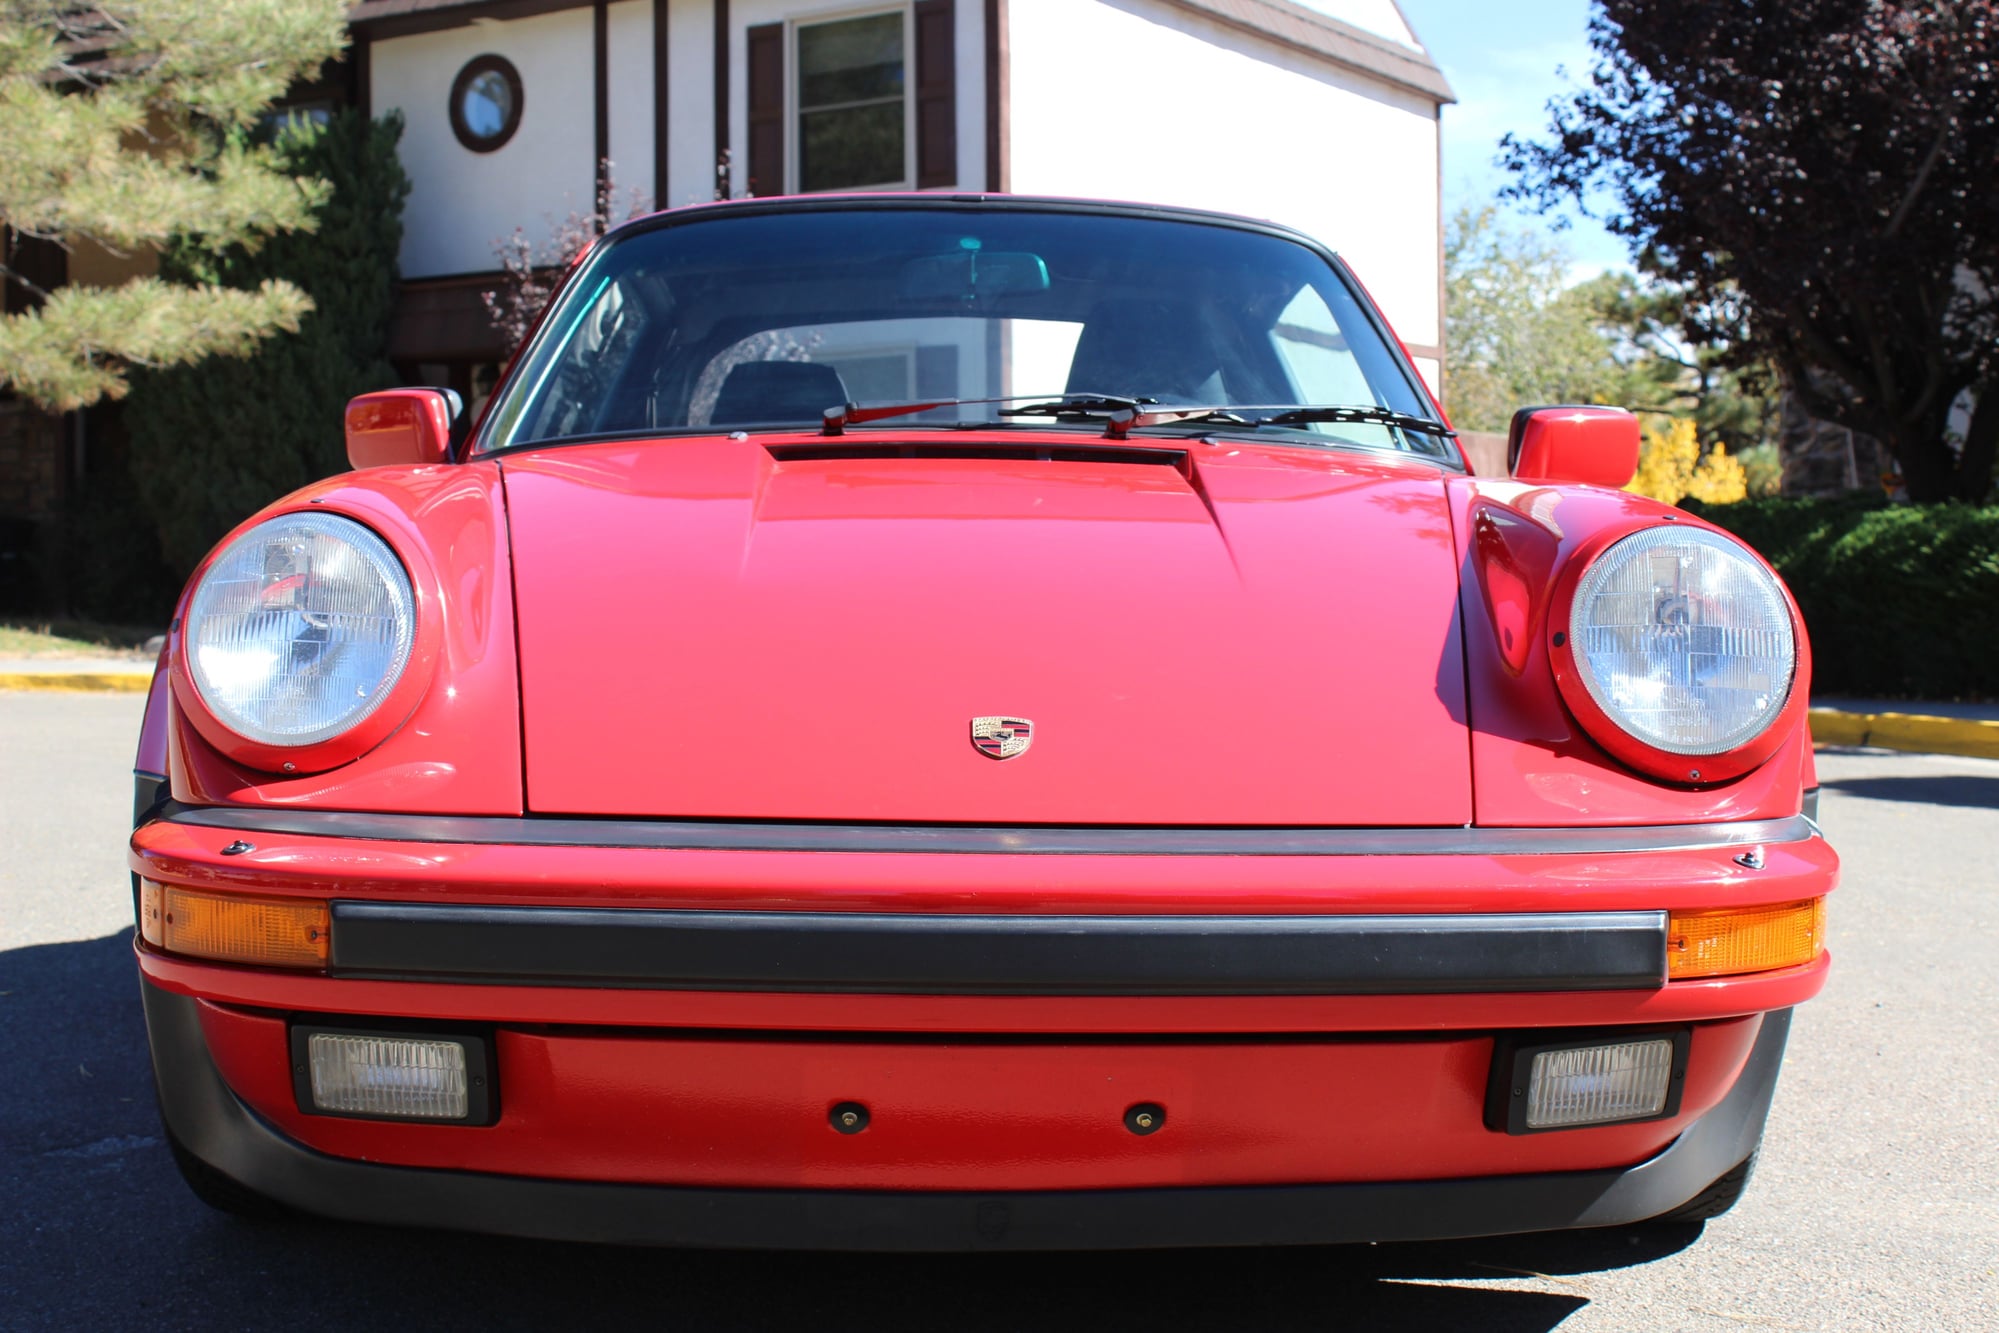 1988 Porsche 911 - 1988 930 Convertible. Red/Black. 70k miles. - Used - VIN WP0EB0938JS070557 - 69,000 Miles - 6 cyl - 2WD - Manual - Convertible - Red - Los Alamos, NM 87544, United States